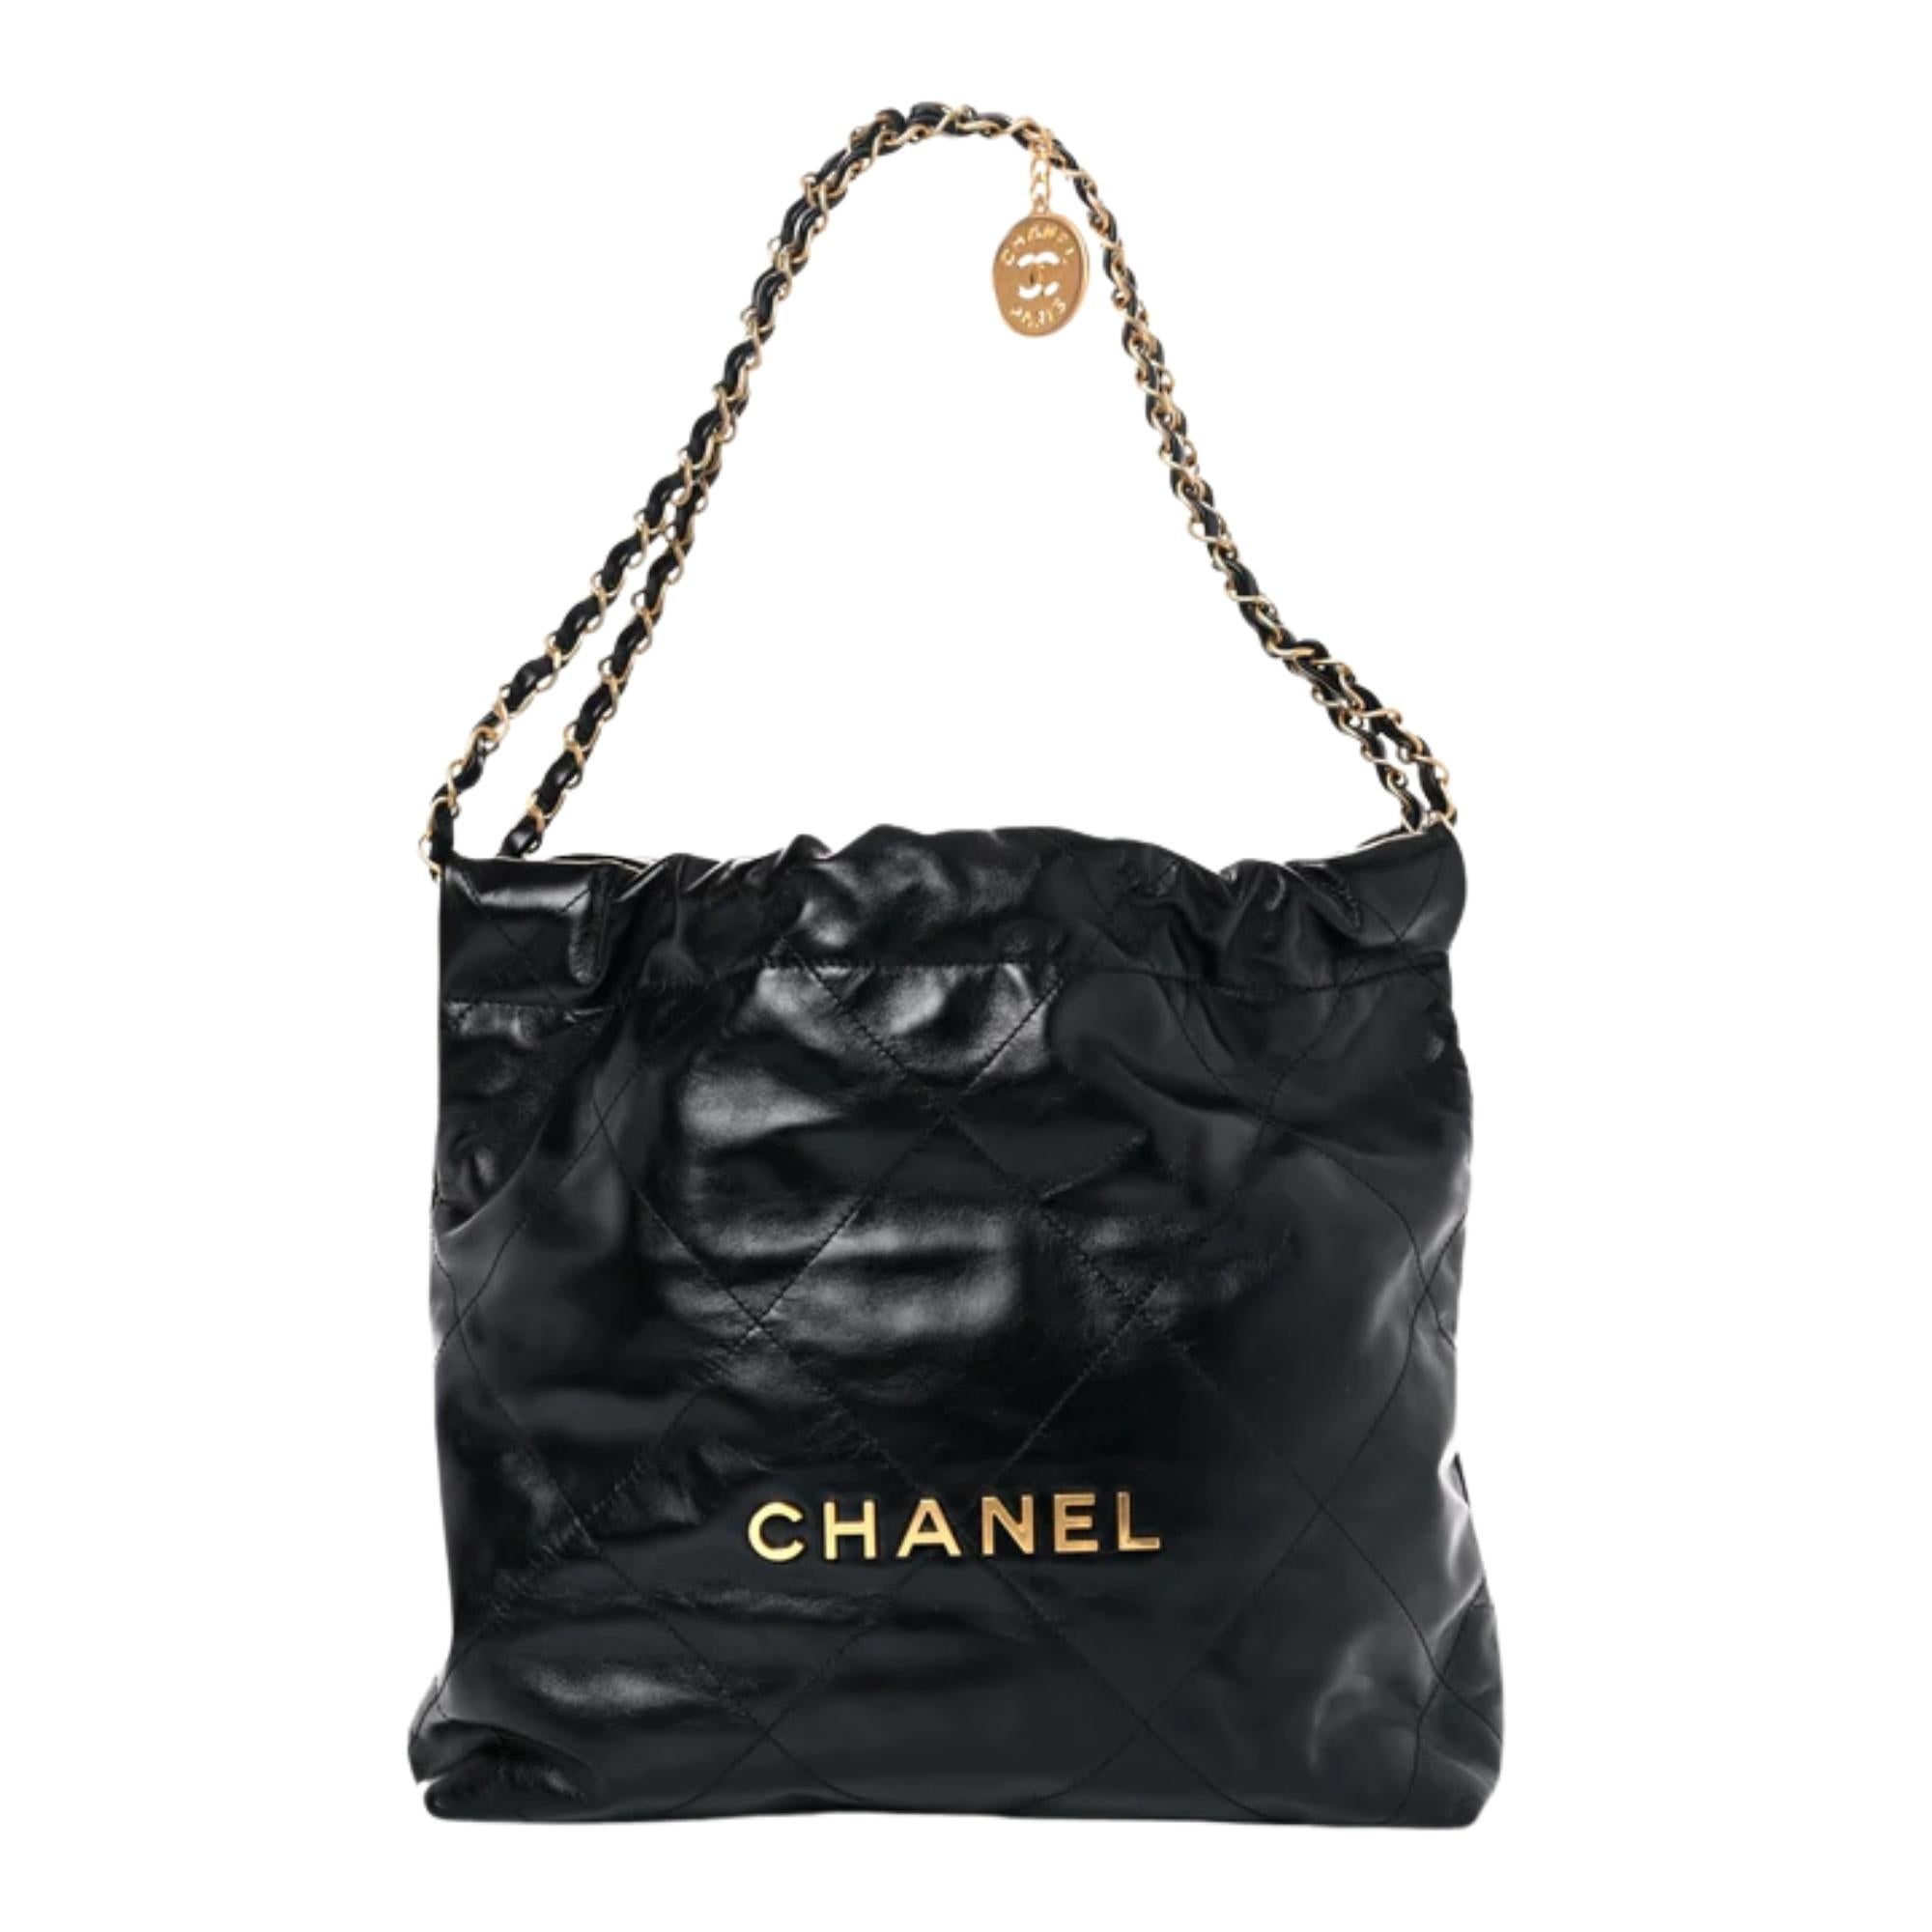 This bag is made of diamond-stitched calfskin leather in black with gold tone hardware. The bag features leather threaded brass chain shoulder straps, a matching Chanel logo on the front and a hanging logo charm. The drawstring shoulder straps and